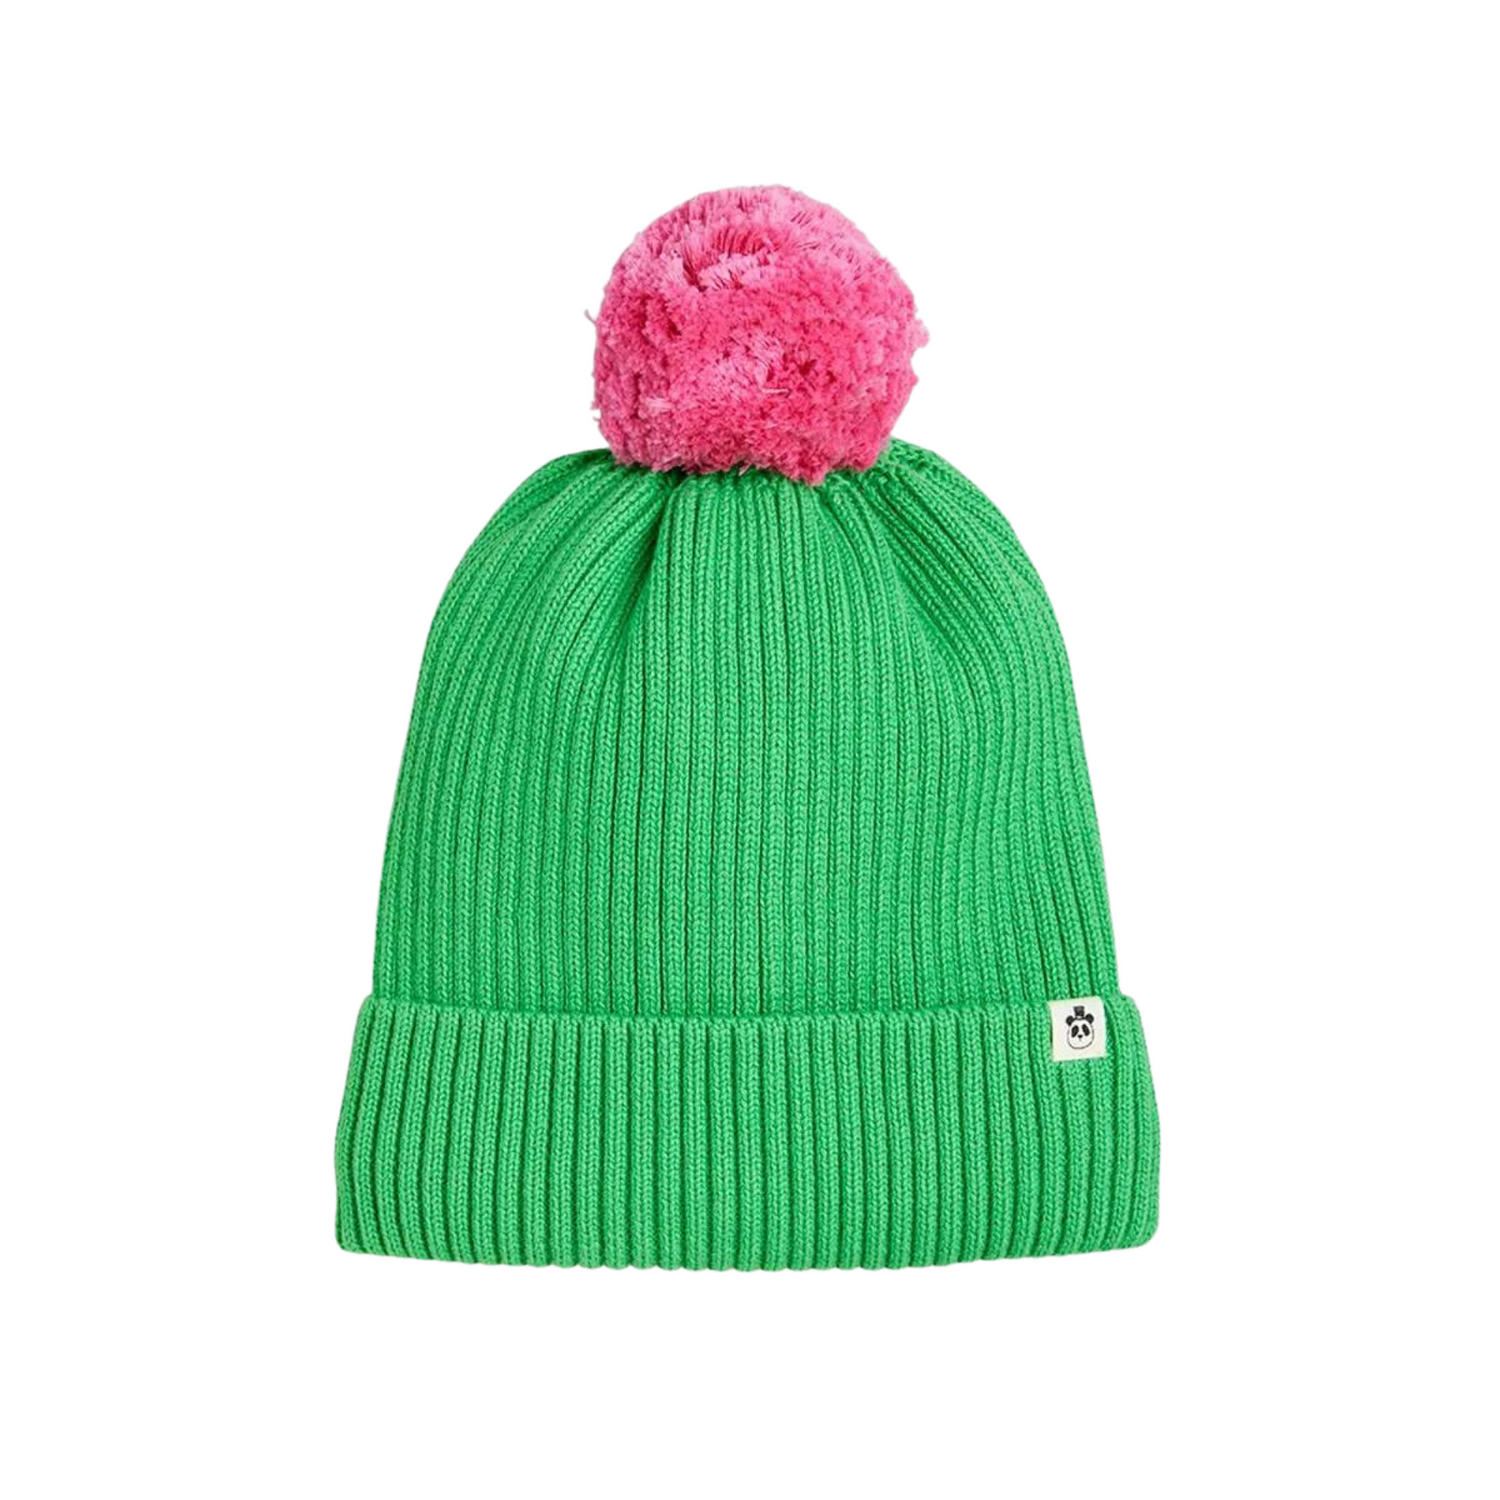 Knitted hat - Green